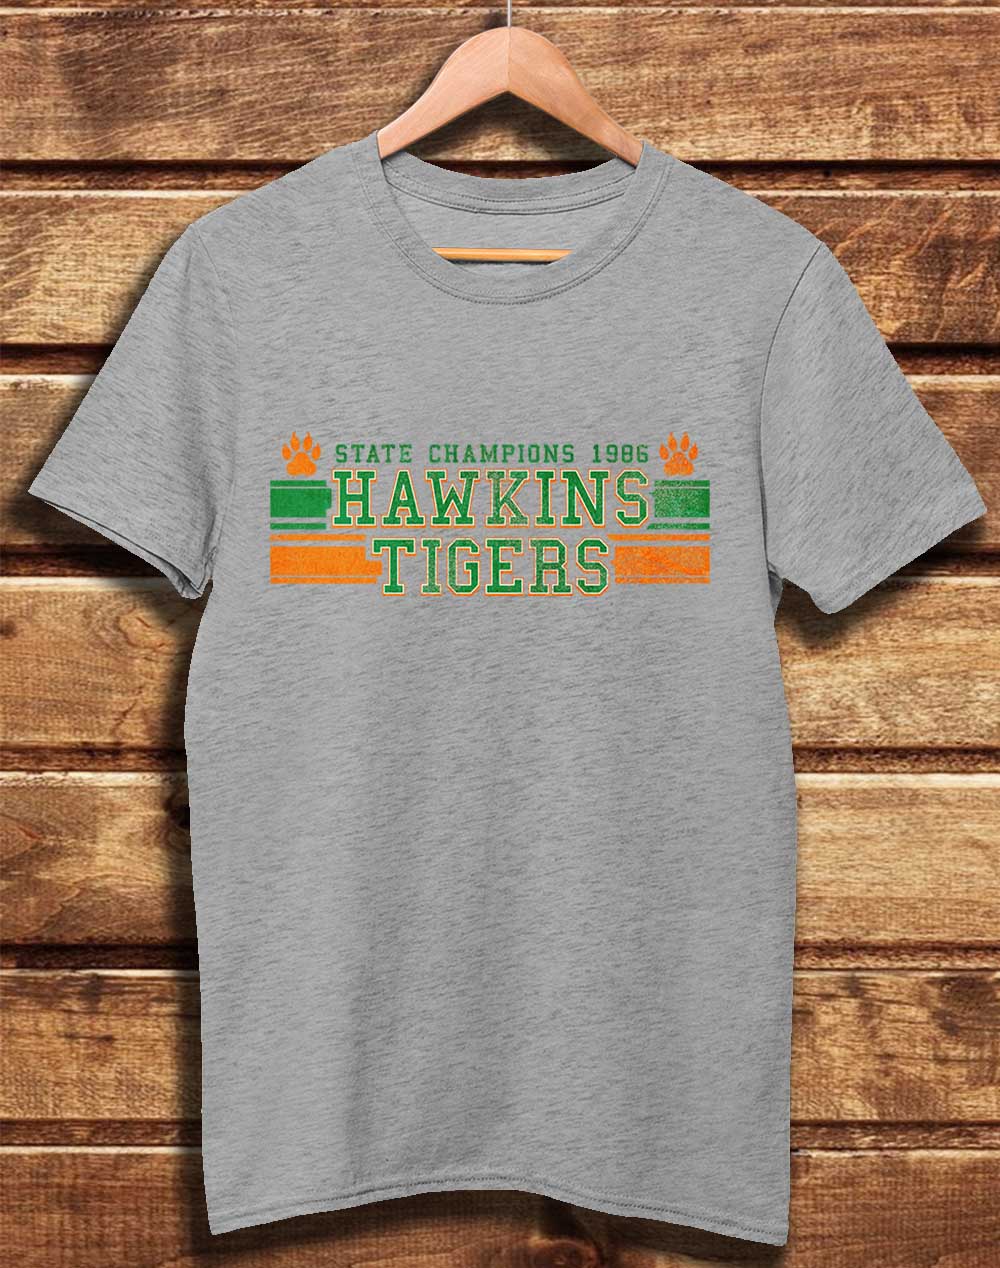 Melange Grey - DELUXE Hawkins Tigers State Champs 1986 Organic Cotton T-Shirt